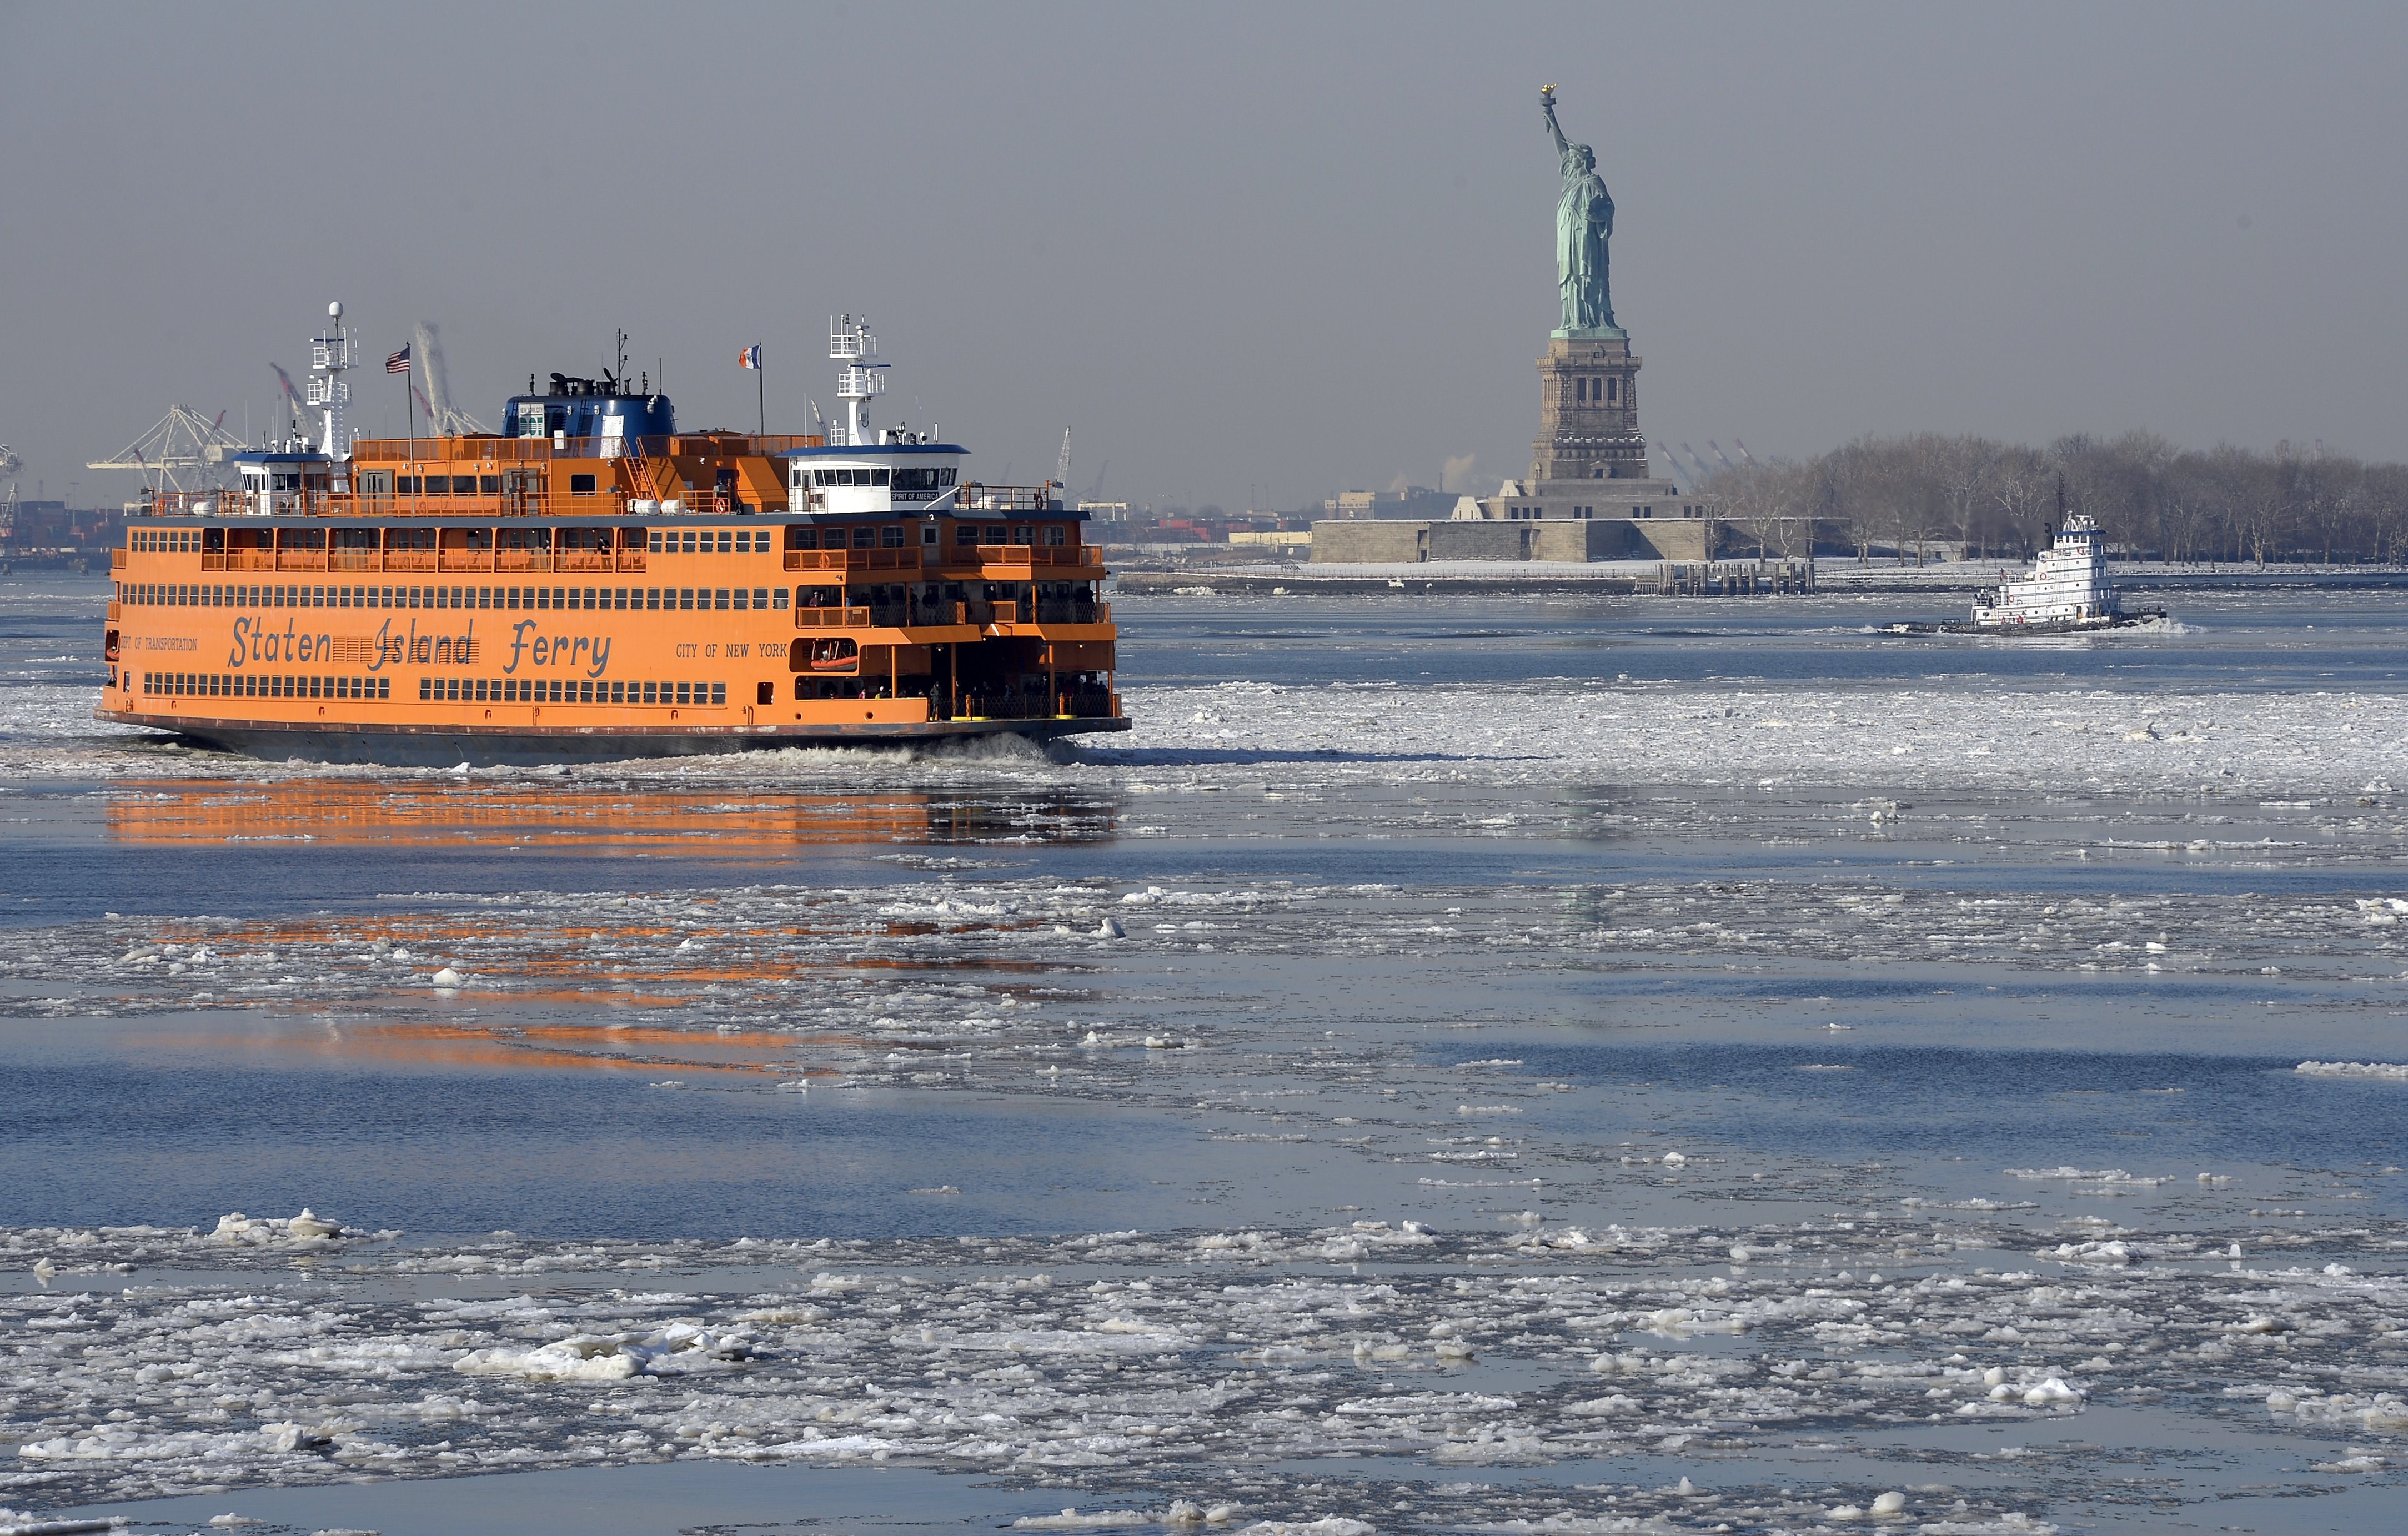 A view of the Statue of Liberty is seen as the Staten Island Ferry passes by on February 25, 2015 (Photo: TIMOTHY A. CLARY/AFP/Getty Images)